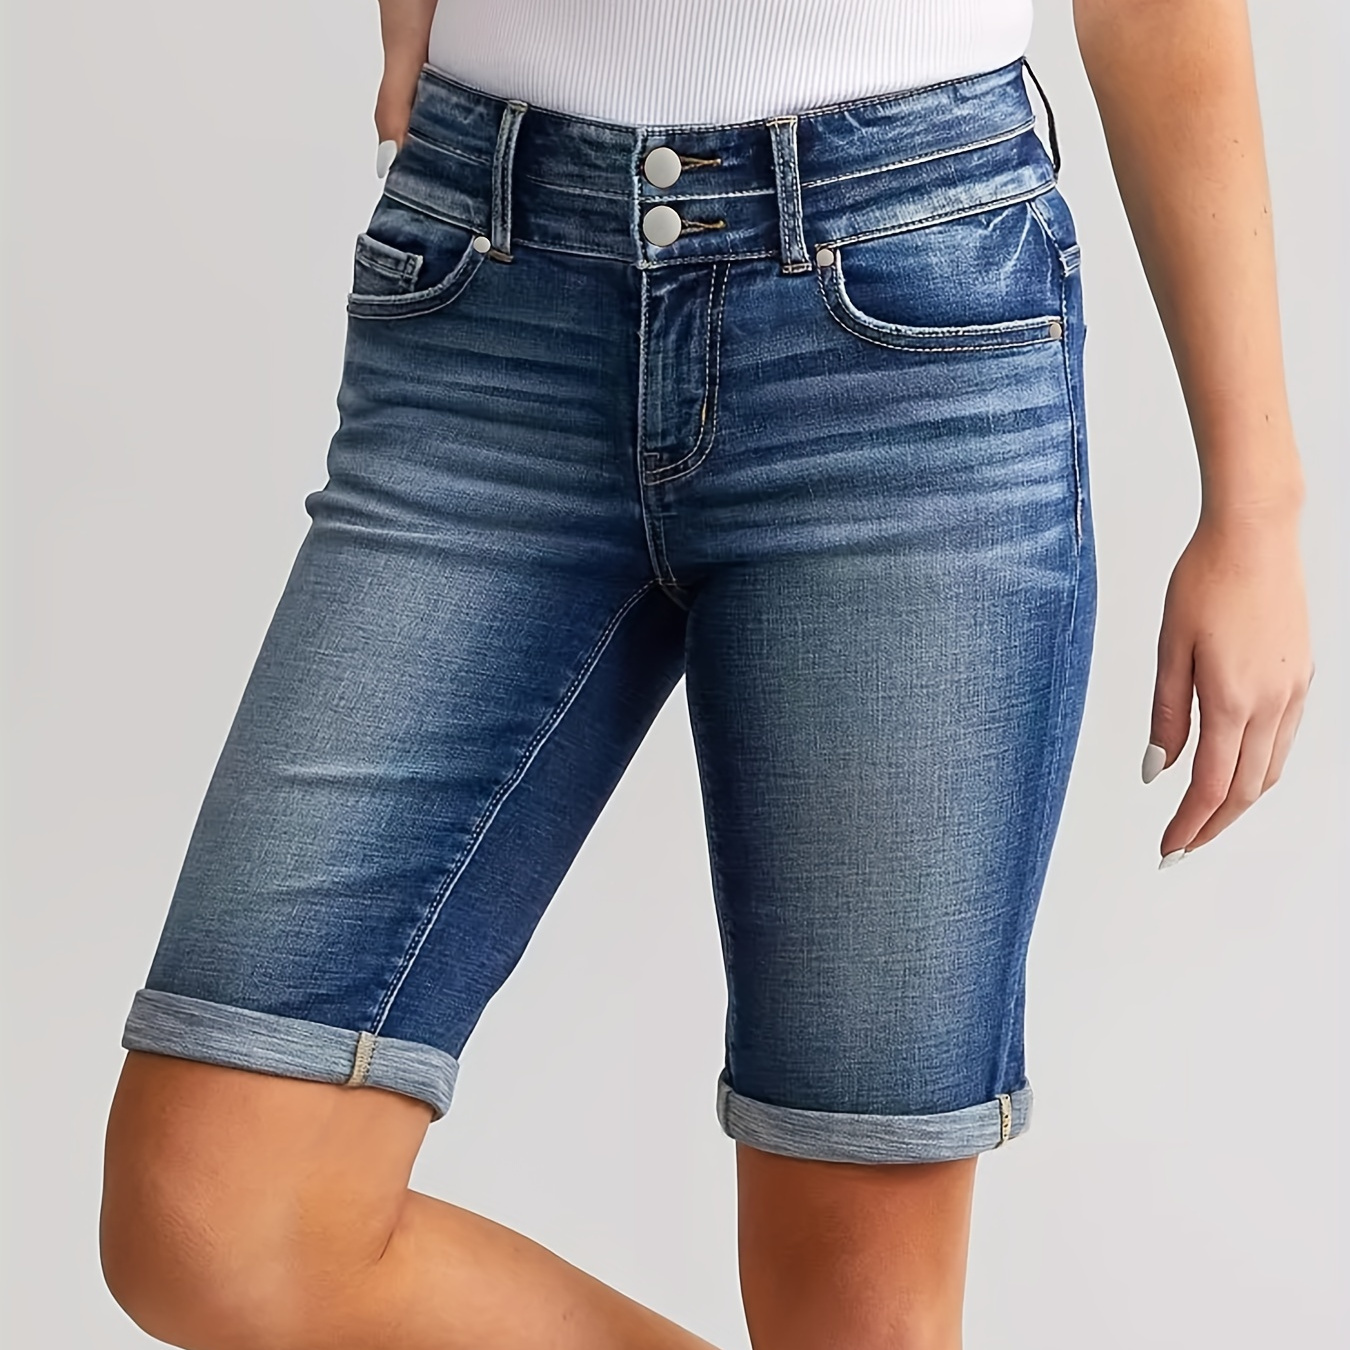 

Women's Casual Distressed Denim Knee-length Bermuda Roll Up Hem Shorts With Double Buttons Detail And Ripped Accents – Stylish Mid-thigh Jeans For Summer